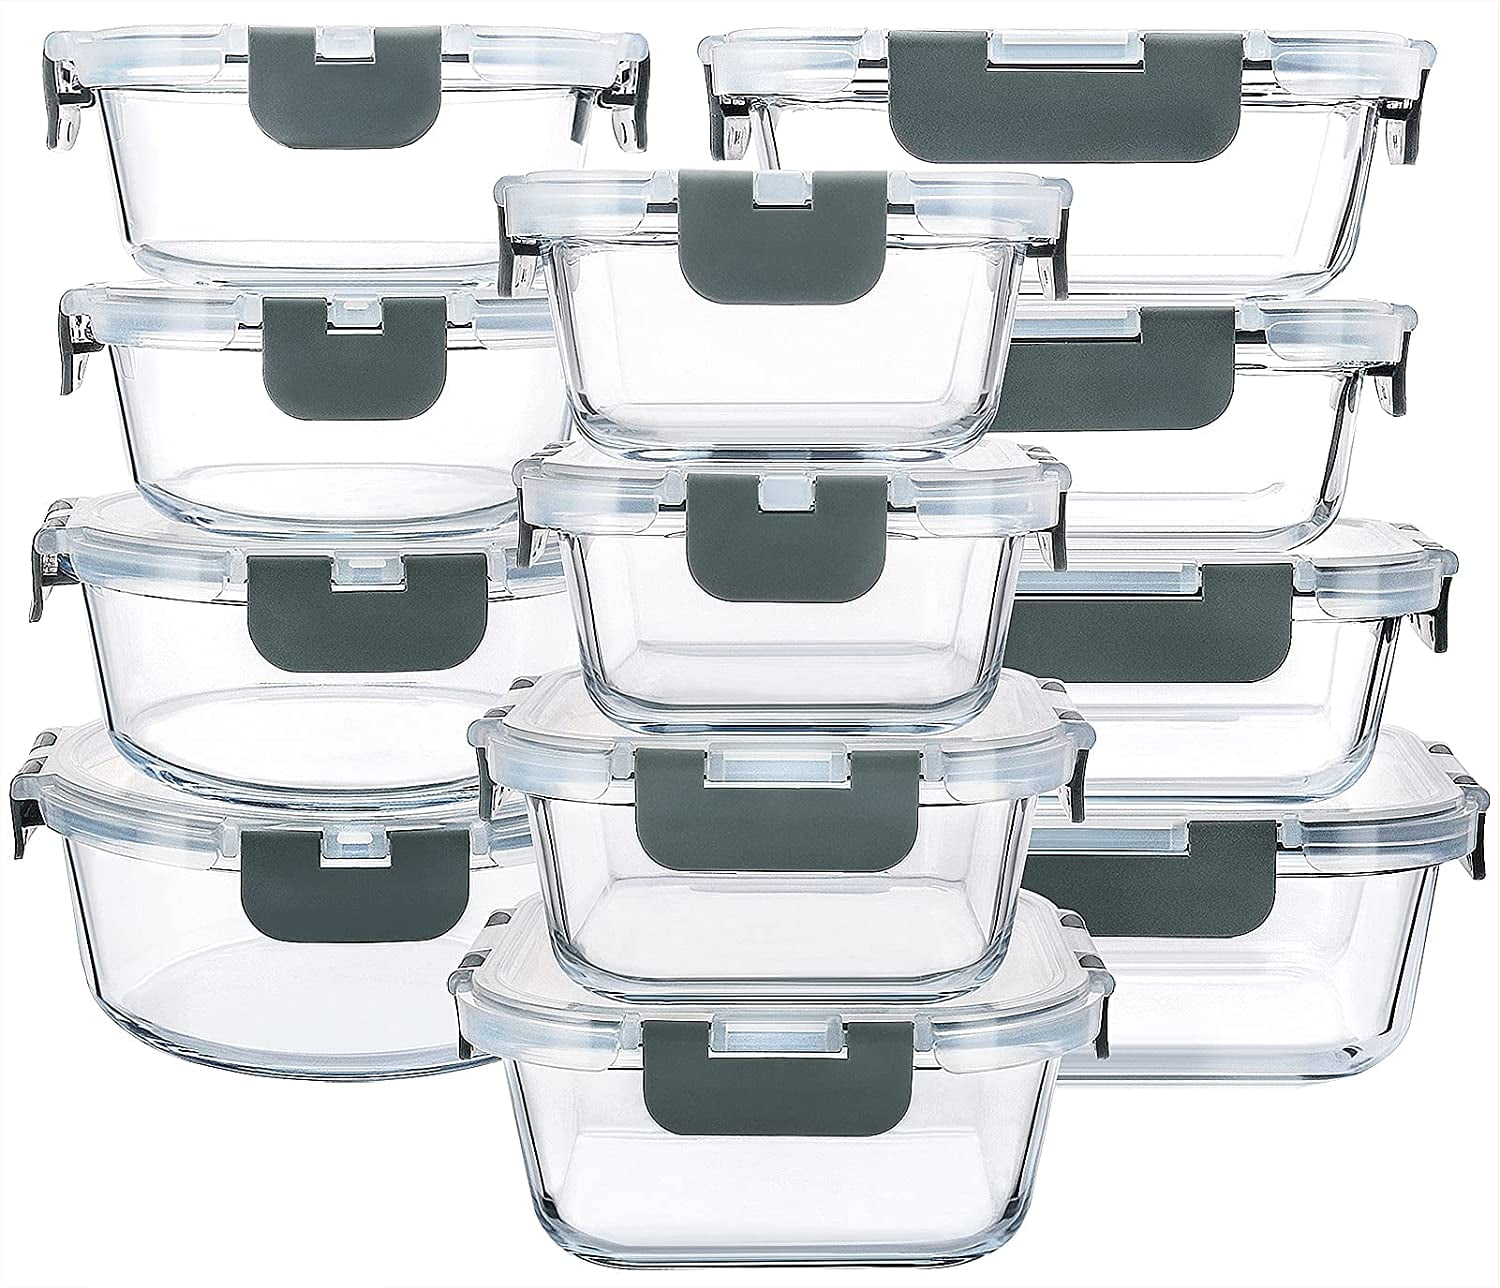 Pyrex® Simply Store, Meal Prep Containers, Blue, 10 Piece set 